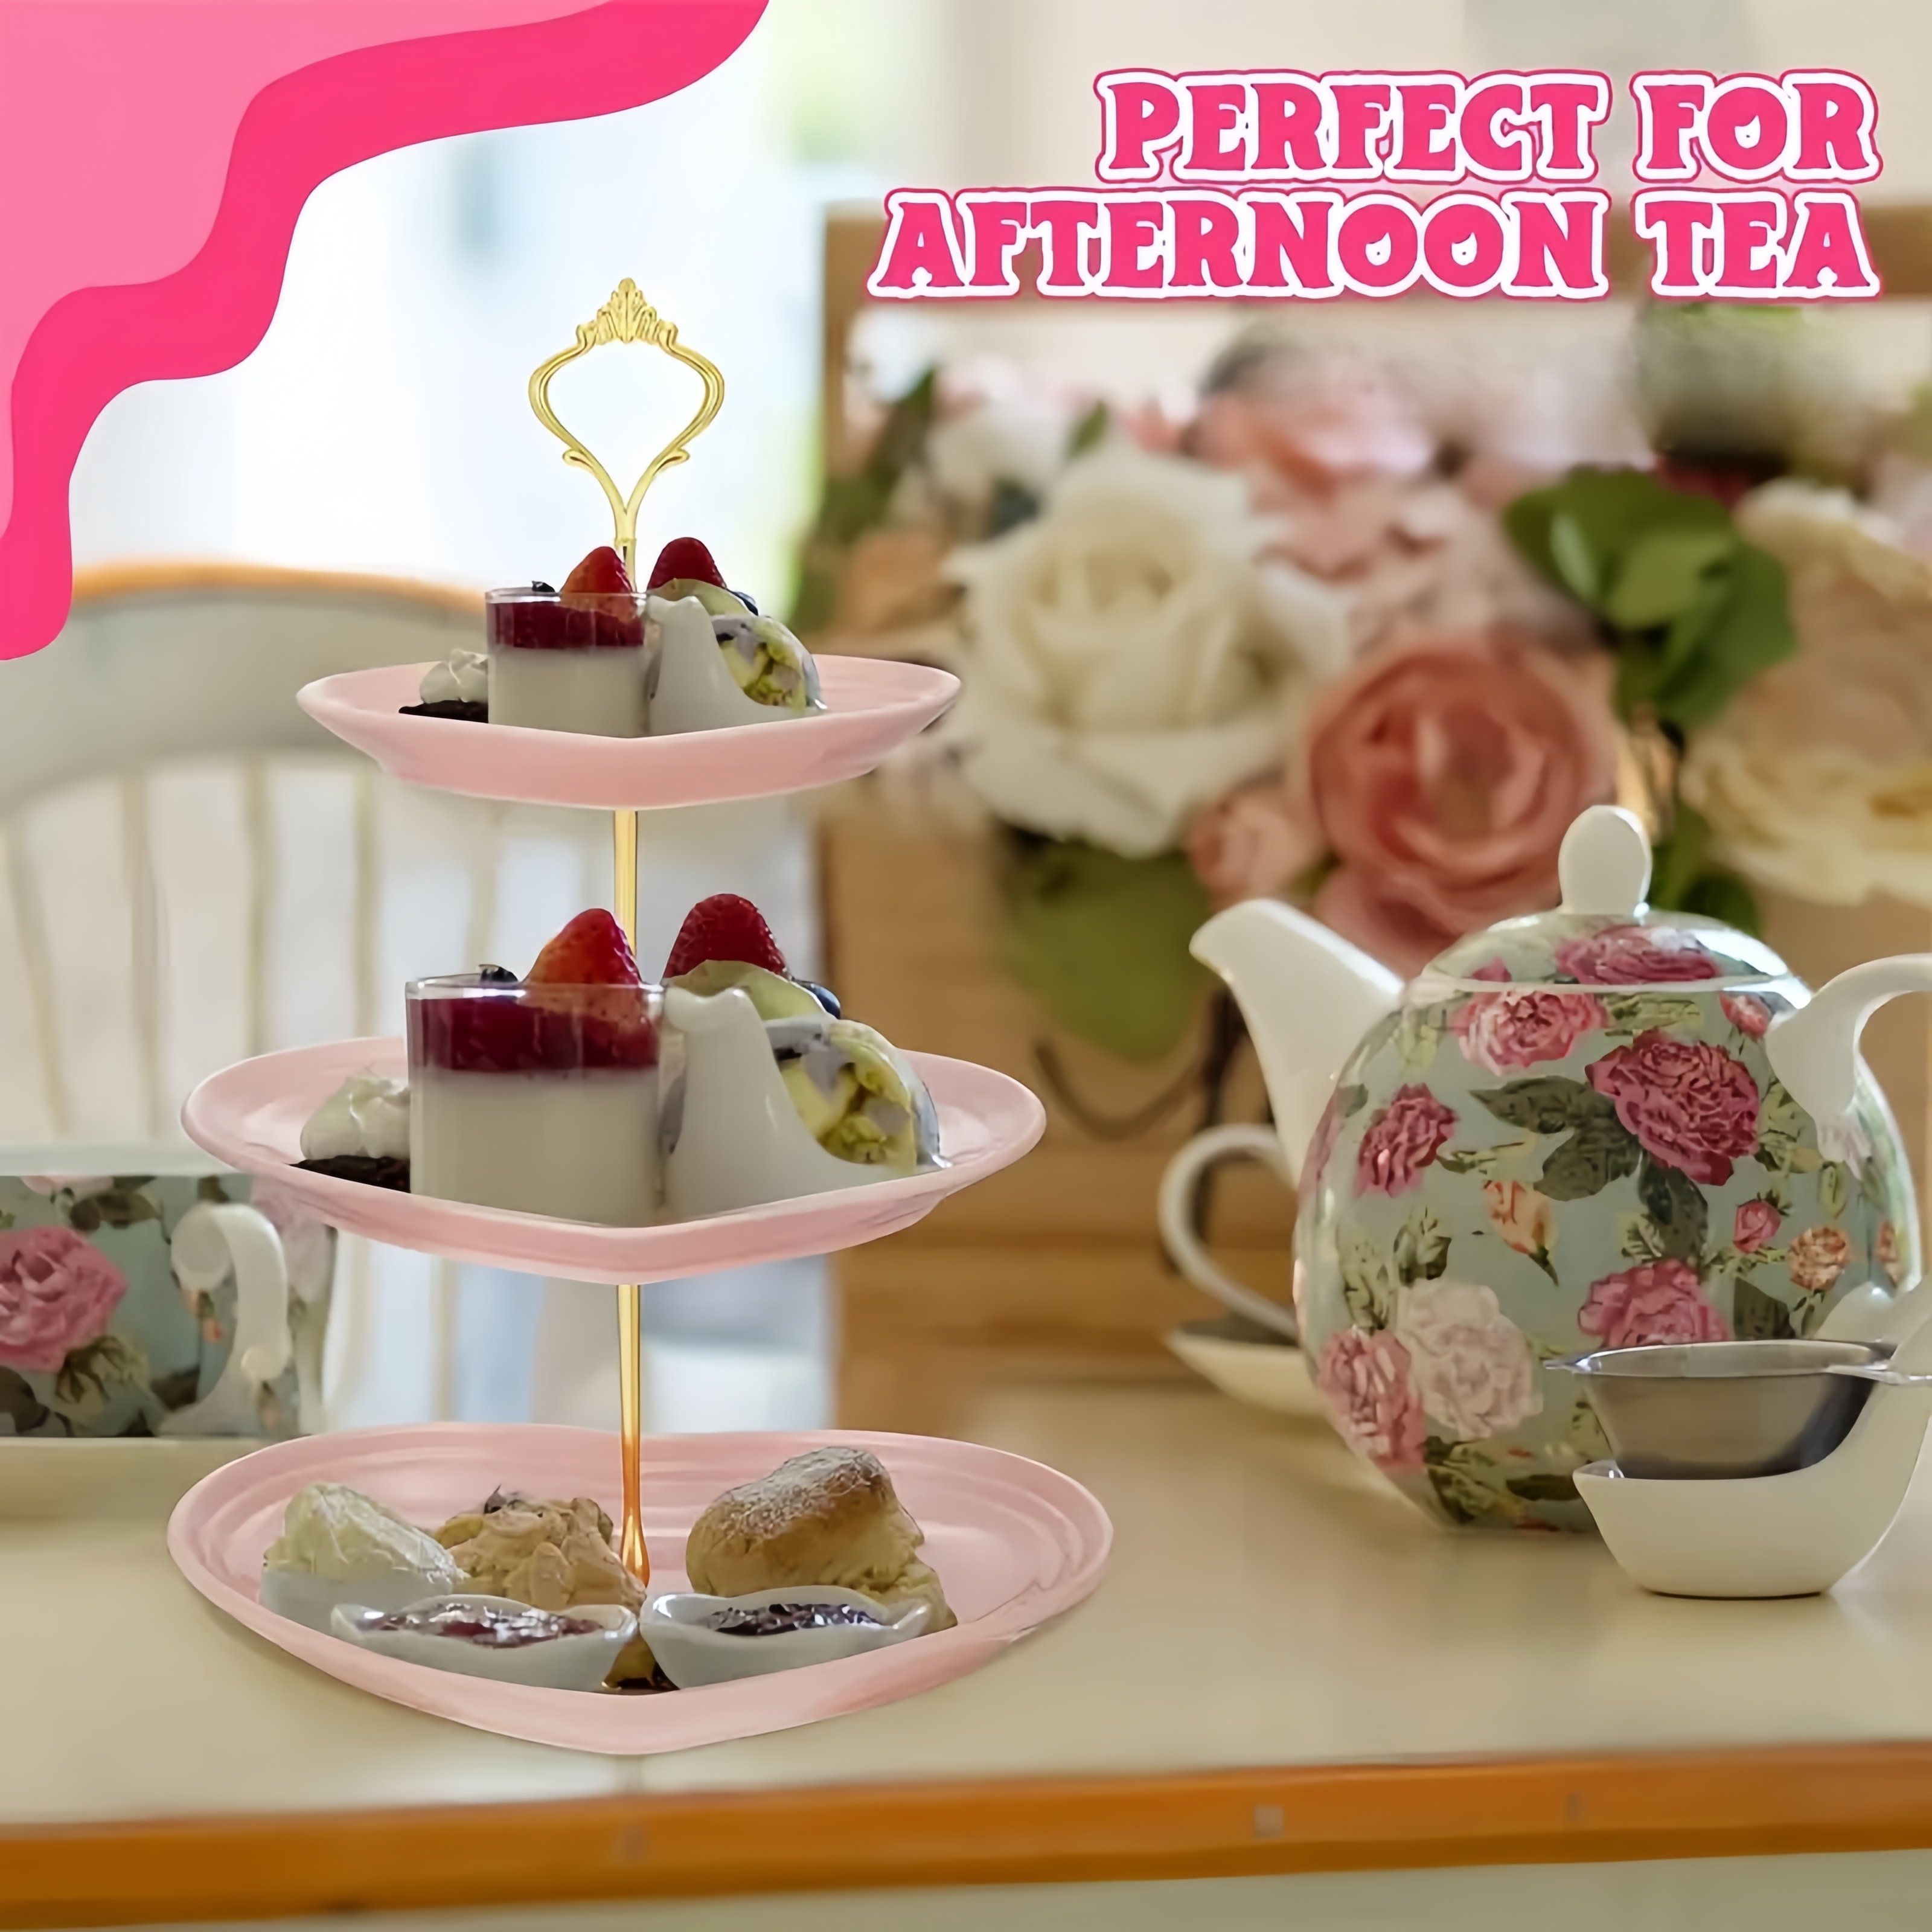 

1pc, Three-tier Paper Cupcake Stand Ceramic Three-tier Tray Platter Heart-shaped Layered Dessert Stand Ceramic Fruit Food Cupcake Stand Wedding Tea Party Service Display Stand (pink)